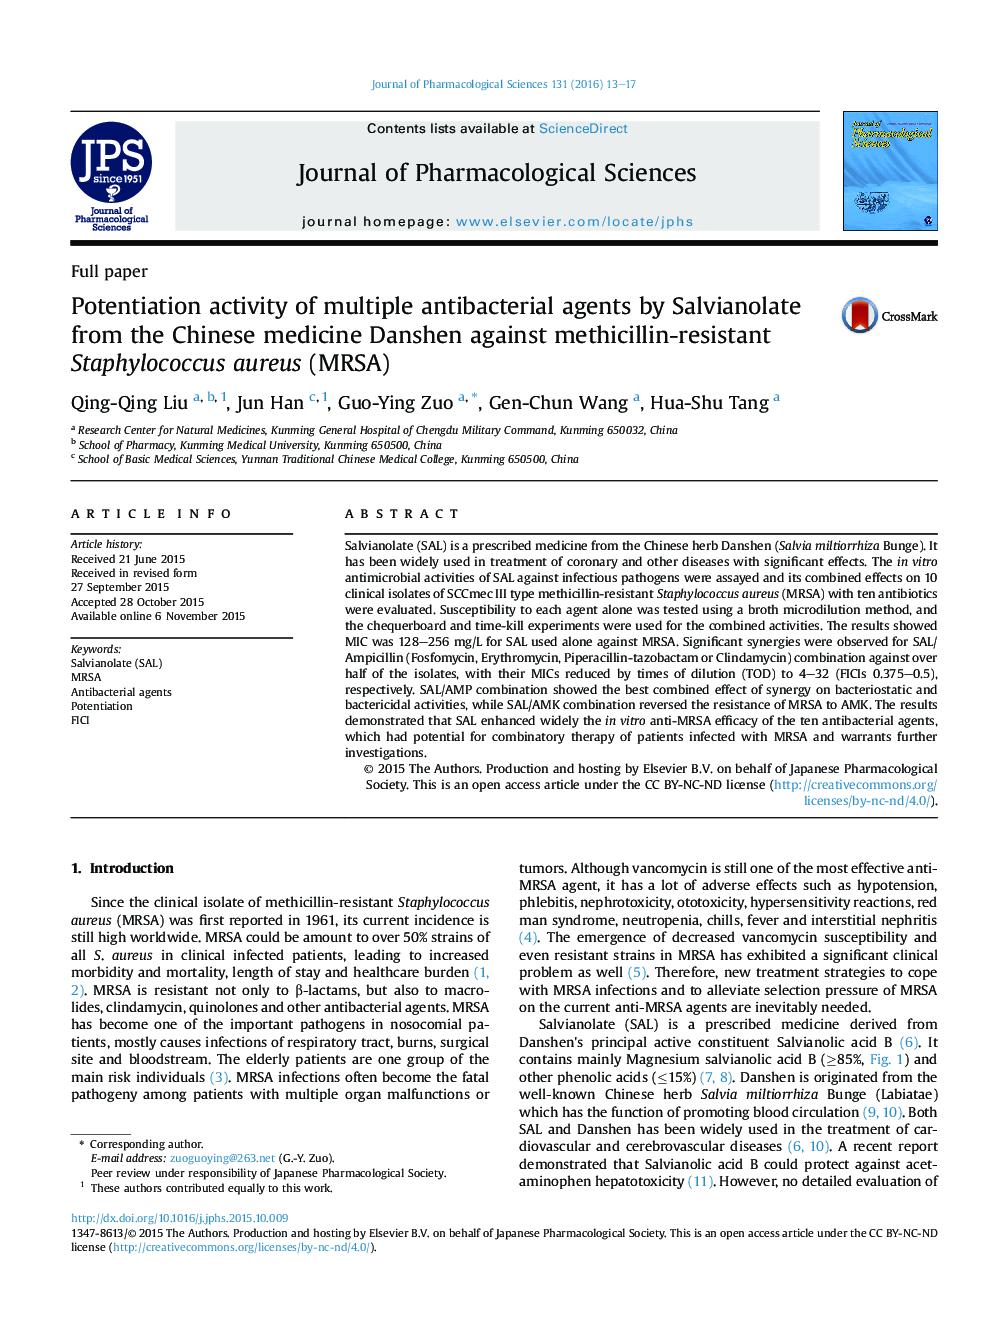 Potentiation activity of multiple antibacterial agents by Salvianolate from the Chinese medicine Danshen against methicillin-resistant Staphylococcus aureus (MRSA) 